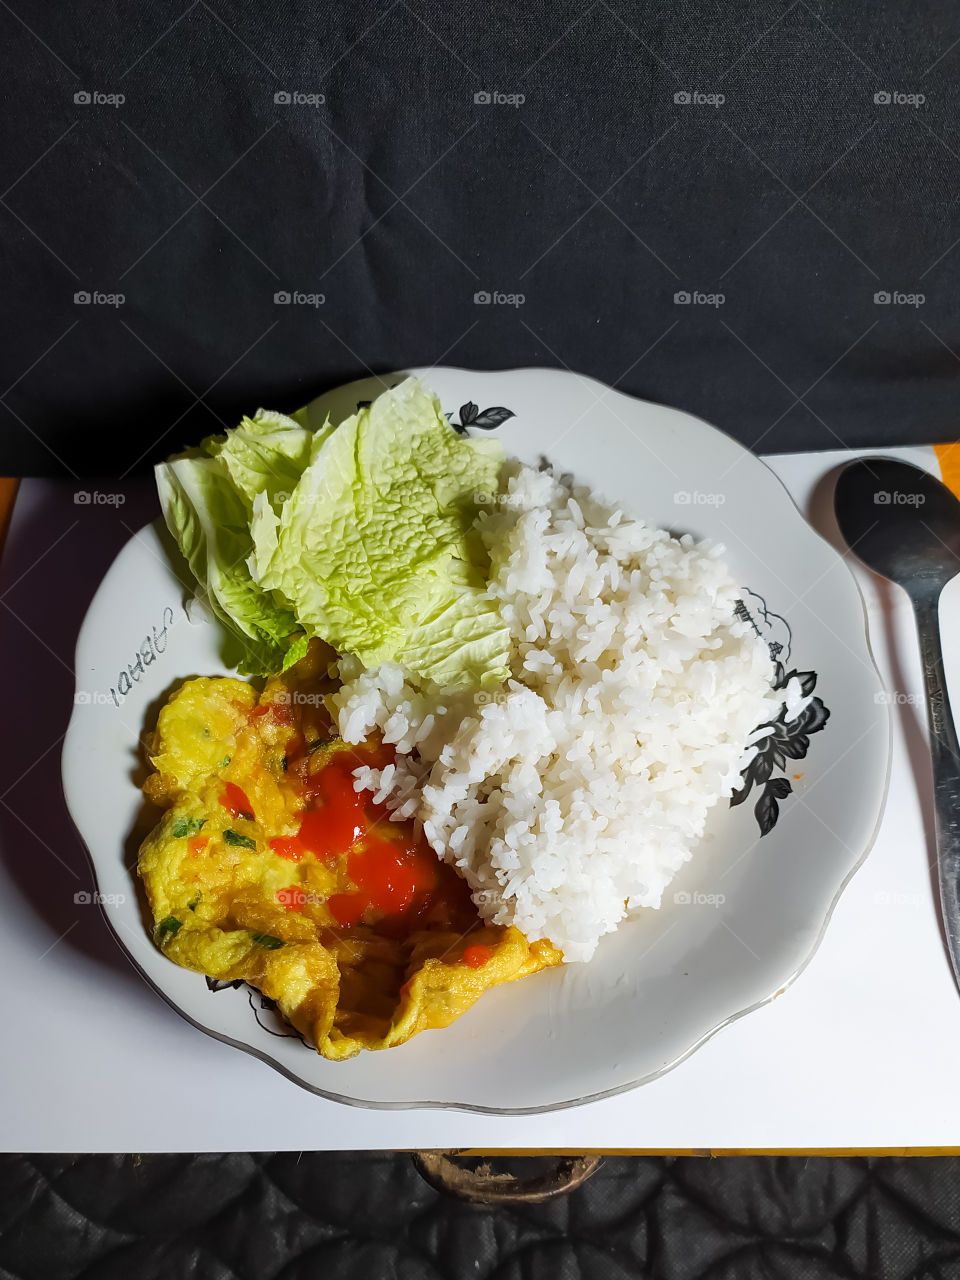 a plate of white rice accompanied by a side dish of fried eggs and fresh vegetables